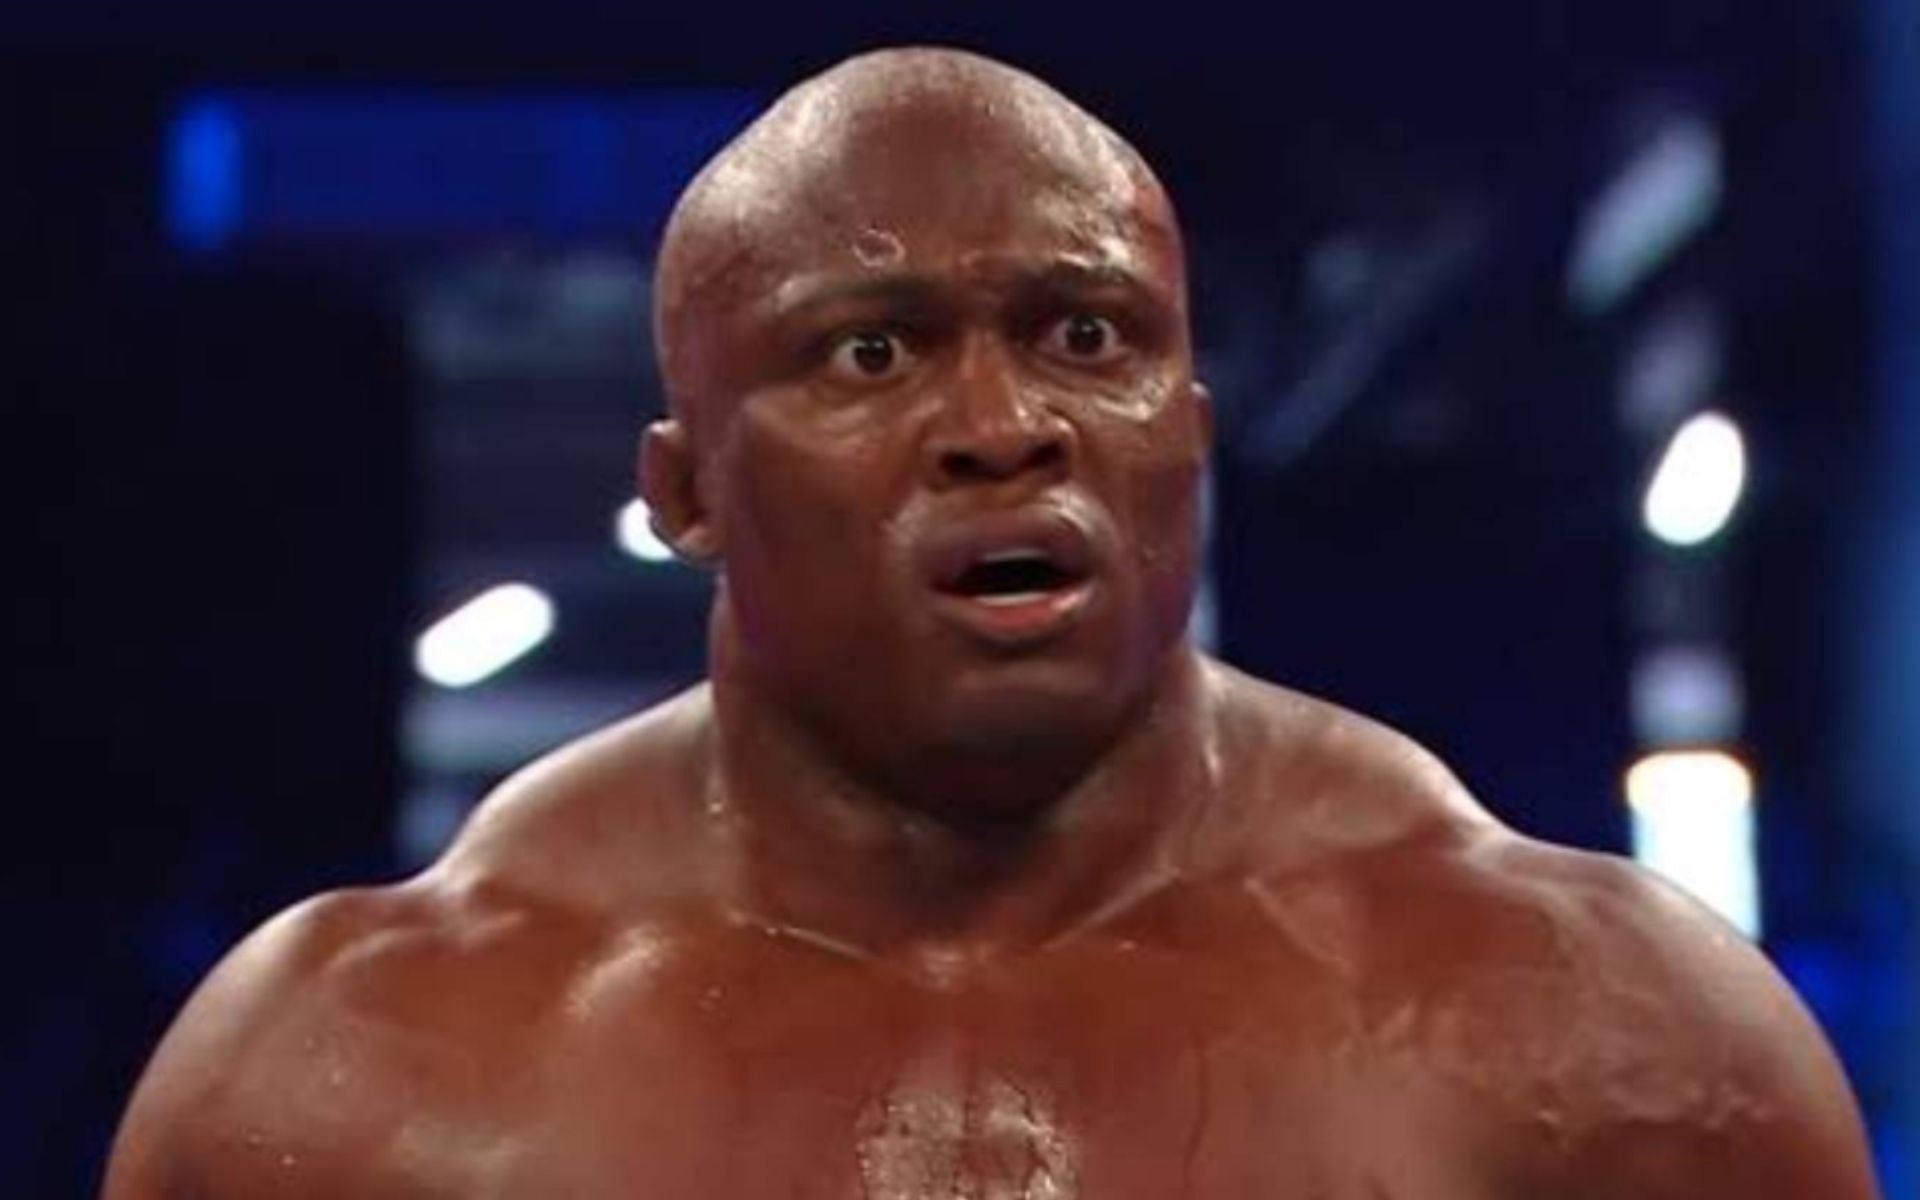 Bobby Lashley is looking to compete in his sixth WrestleMania match